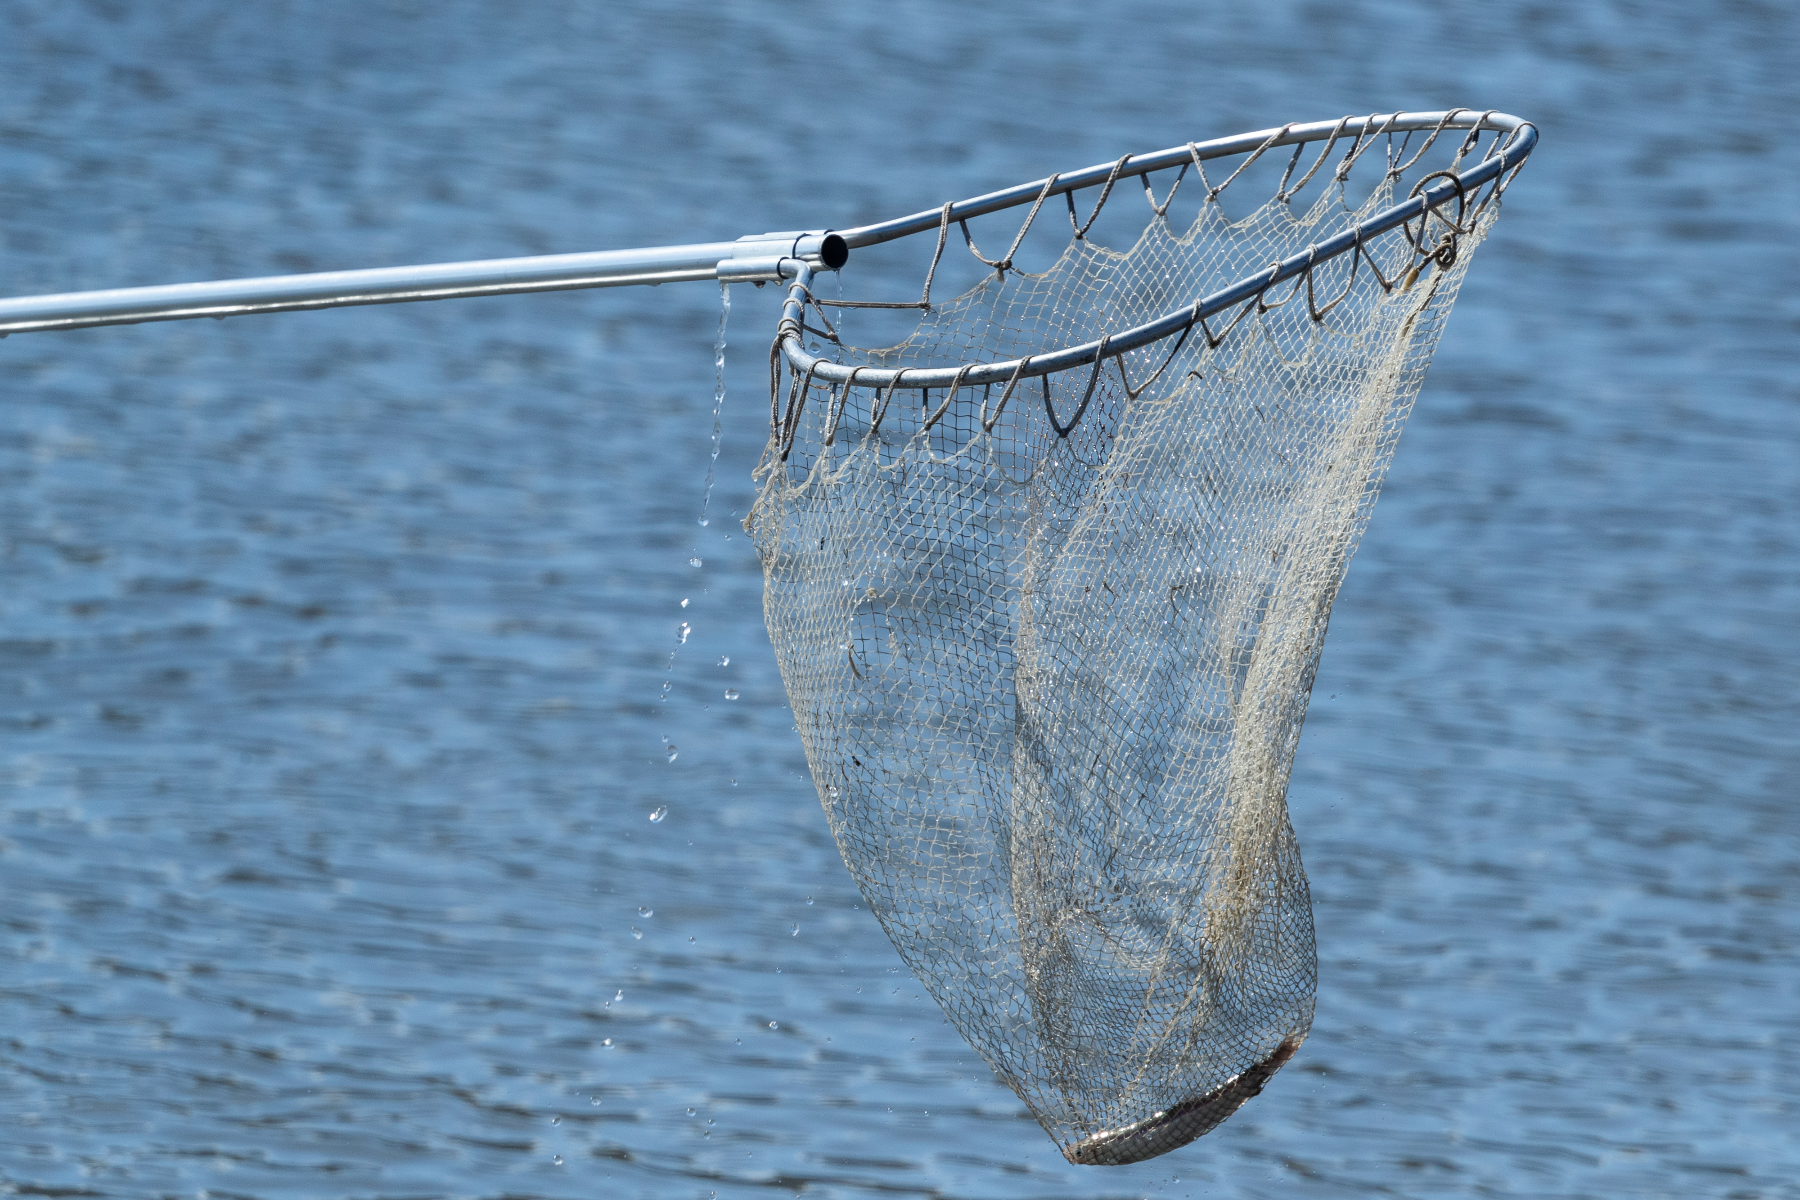 A fishing net is above a water body